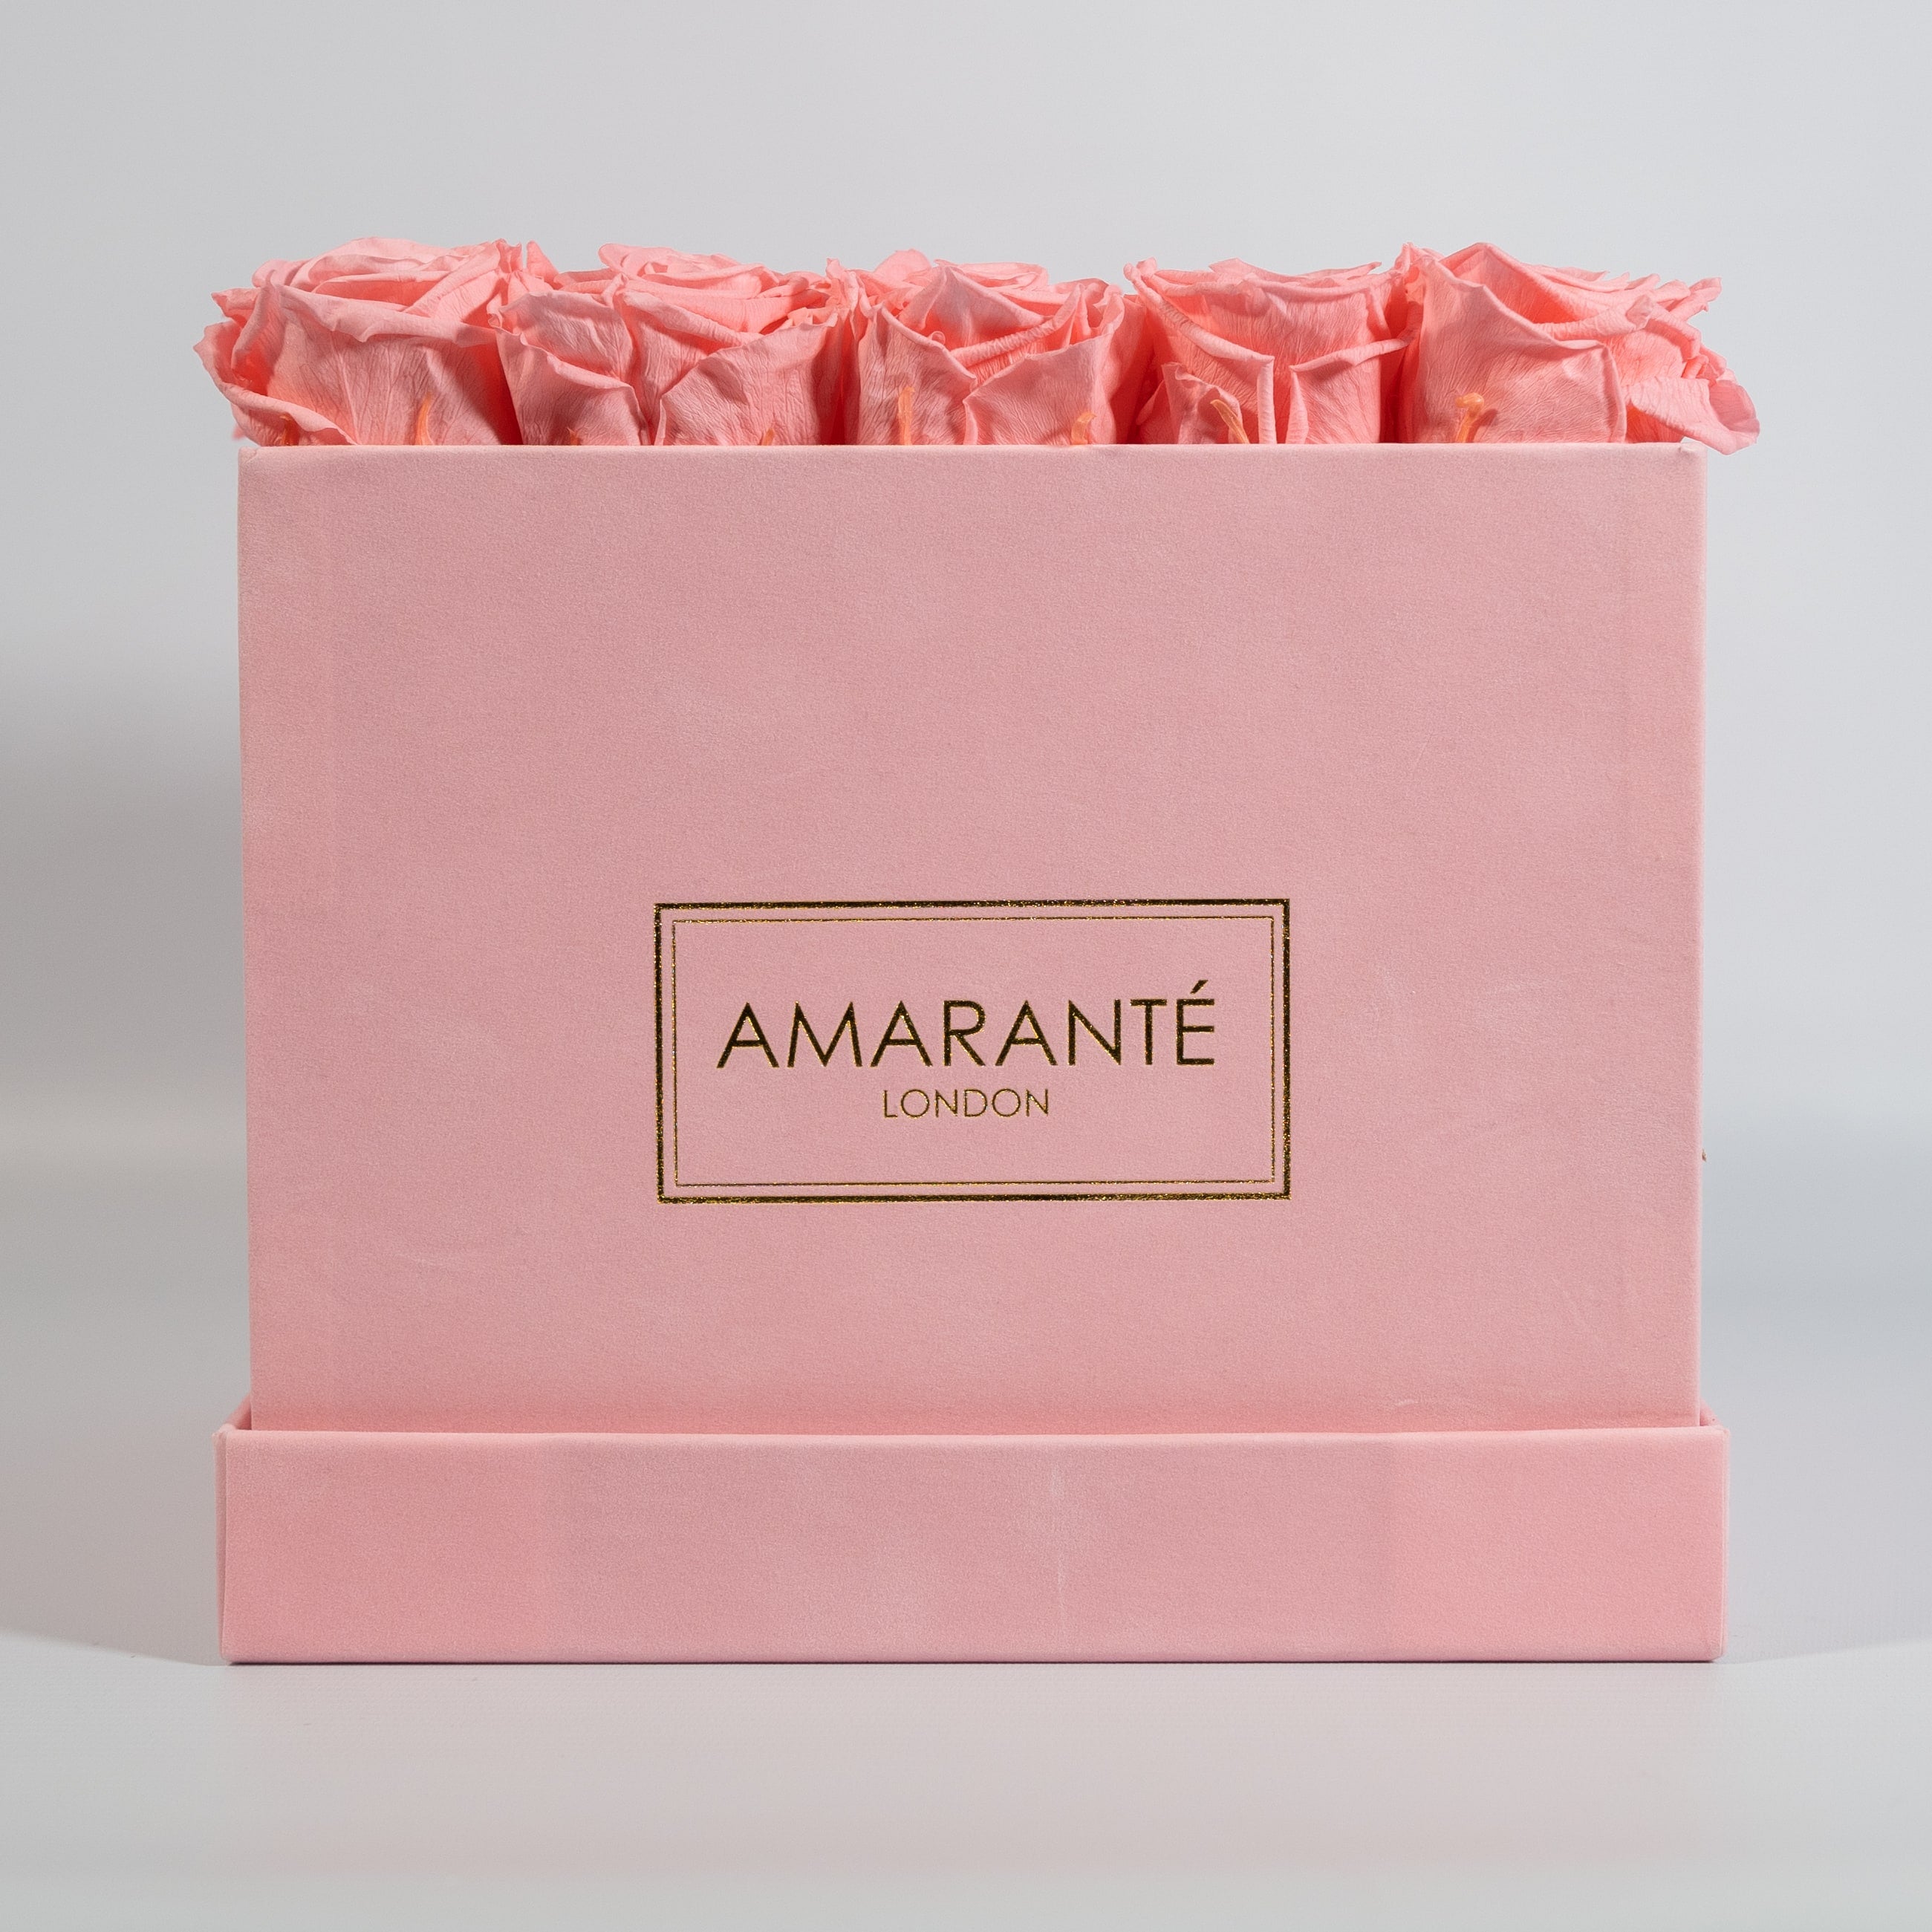 Gorgeous light pink roses encompassed in a tender pink box  